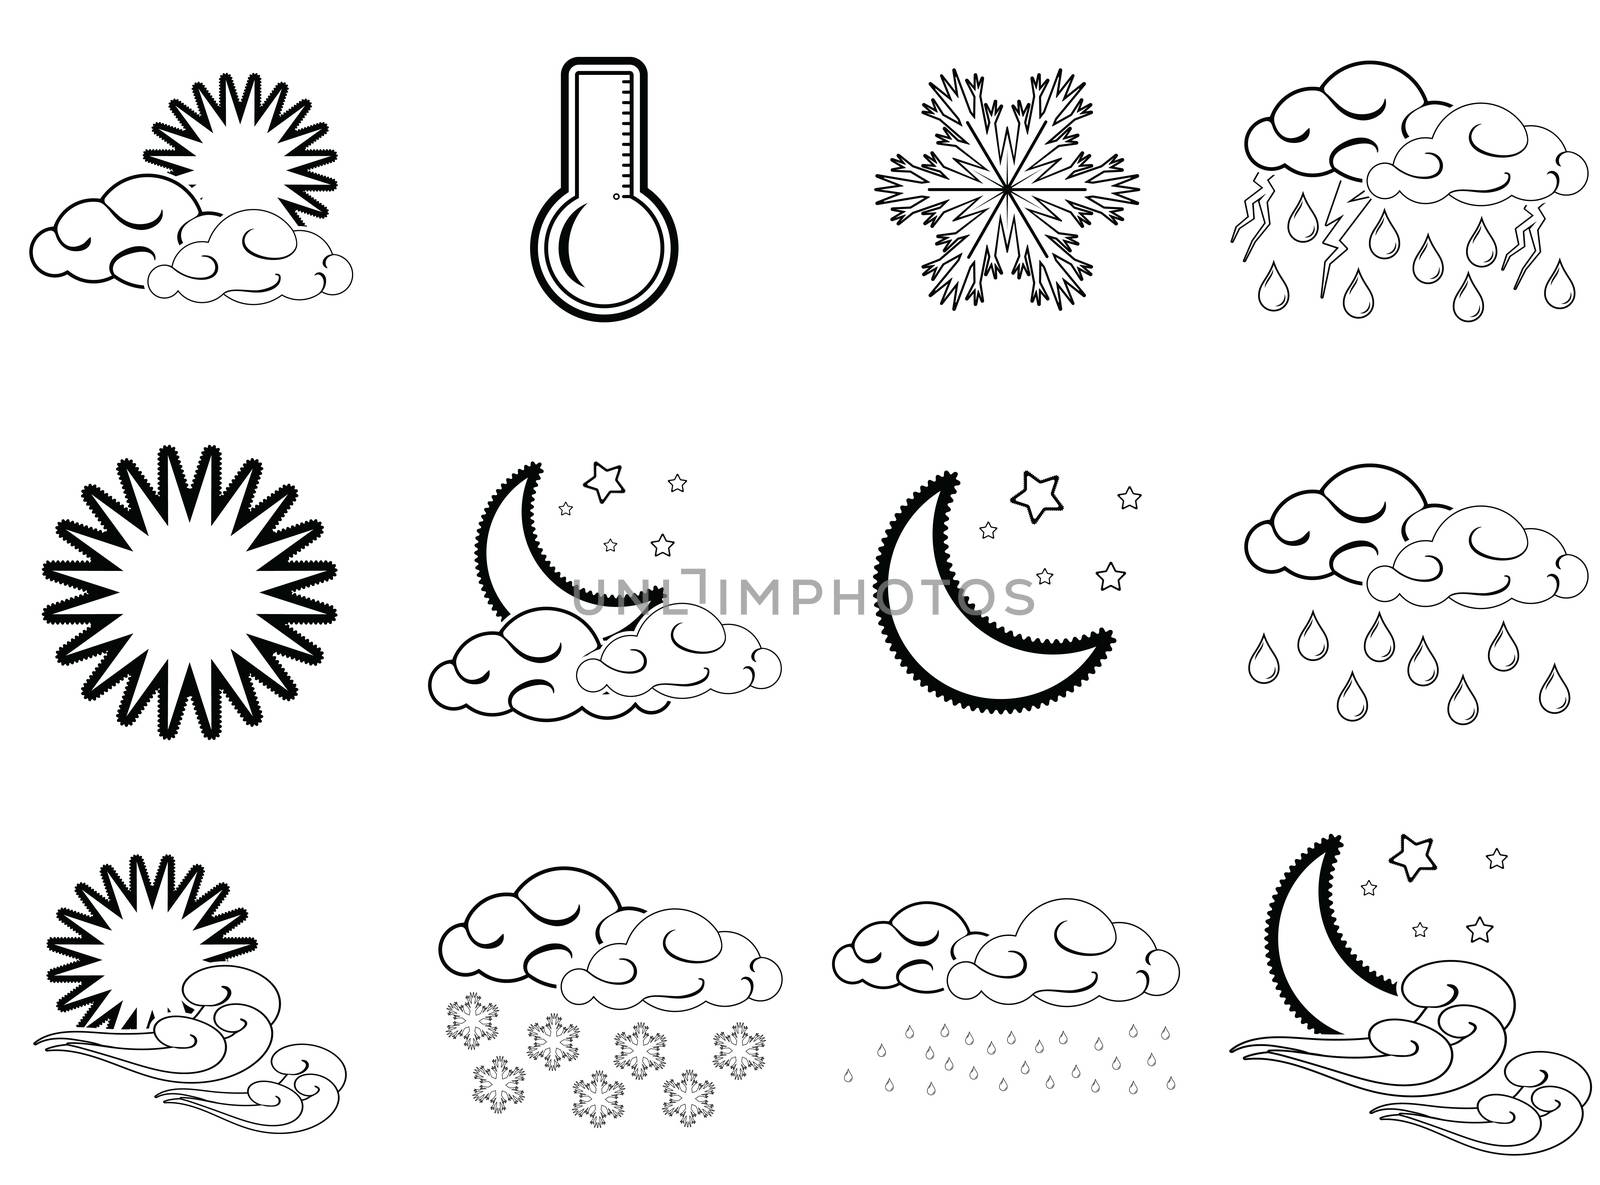 Night day weather colour icons set black outlined isolated on white background.